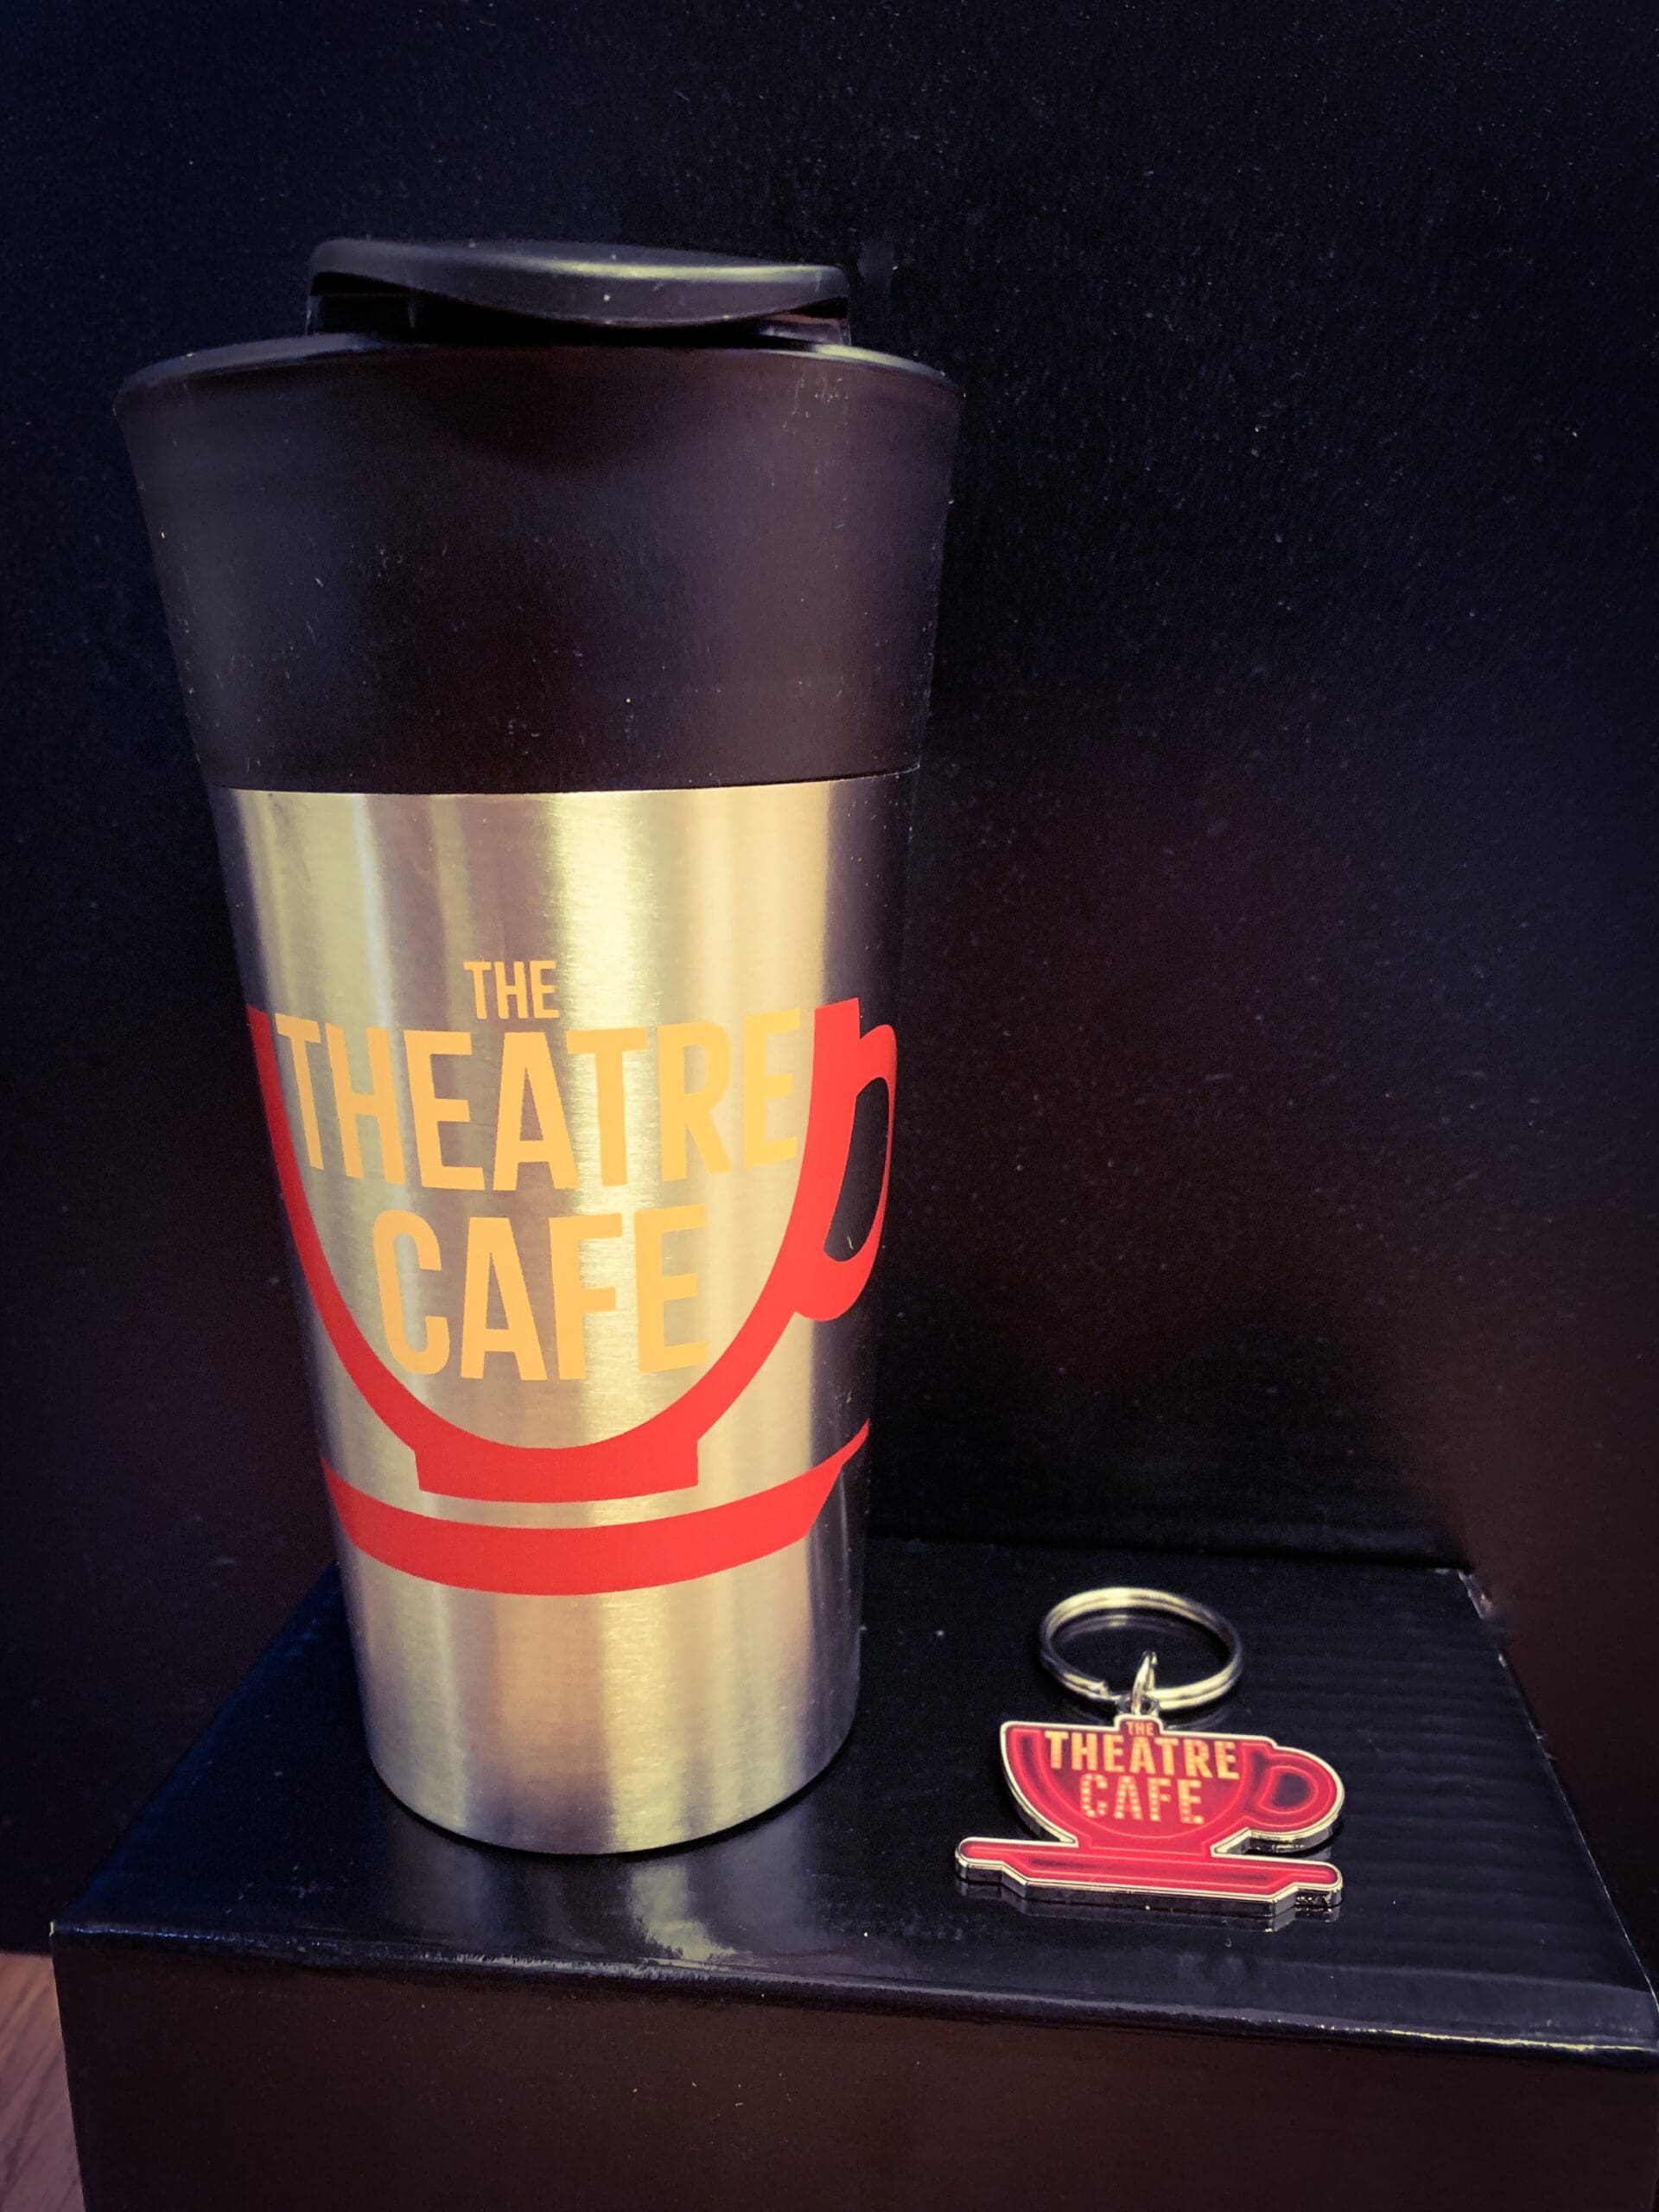 the theatre cafe cup and key ring